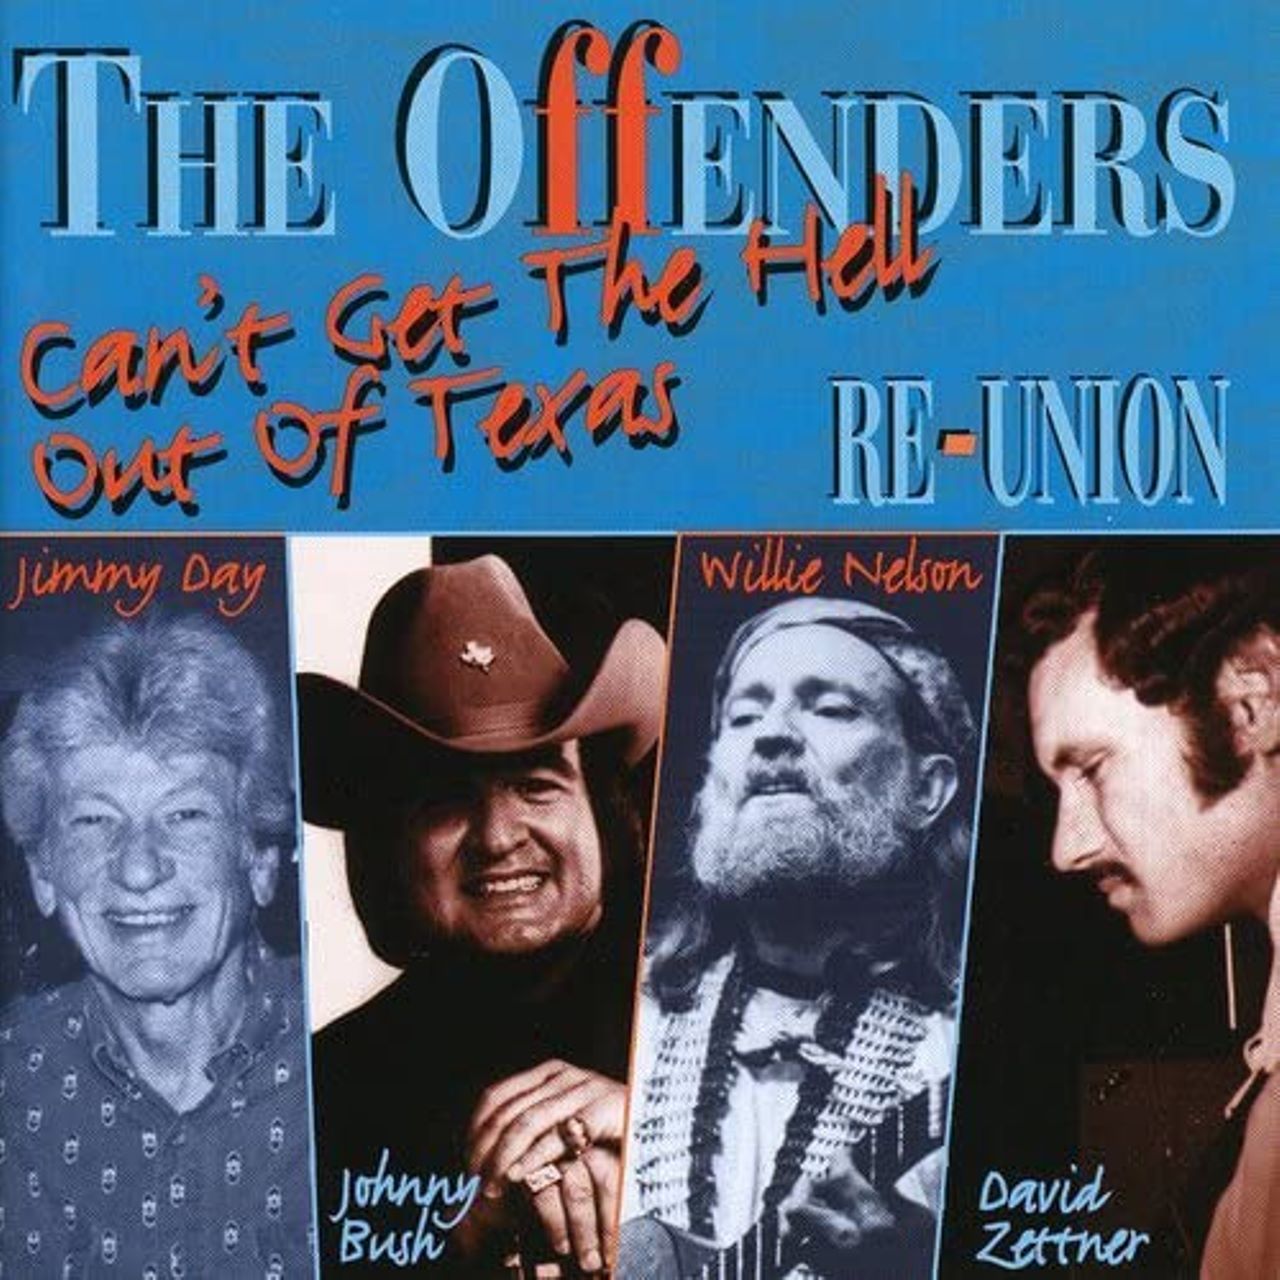 Willie Nelson, Johnny Bush, Jimmy Day & David Zettner – Offenders Reunion Can’t Get The Hell Out Of Texas cover album